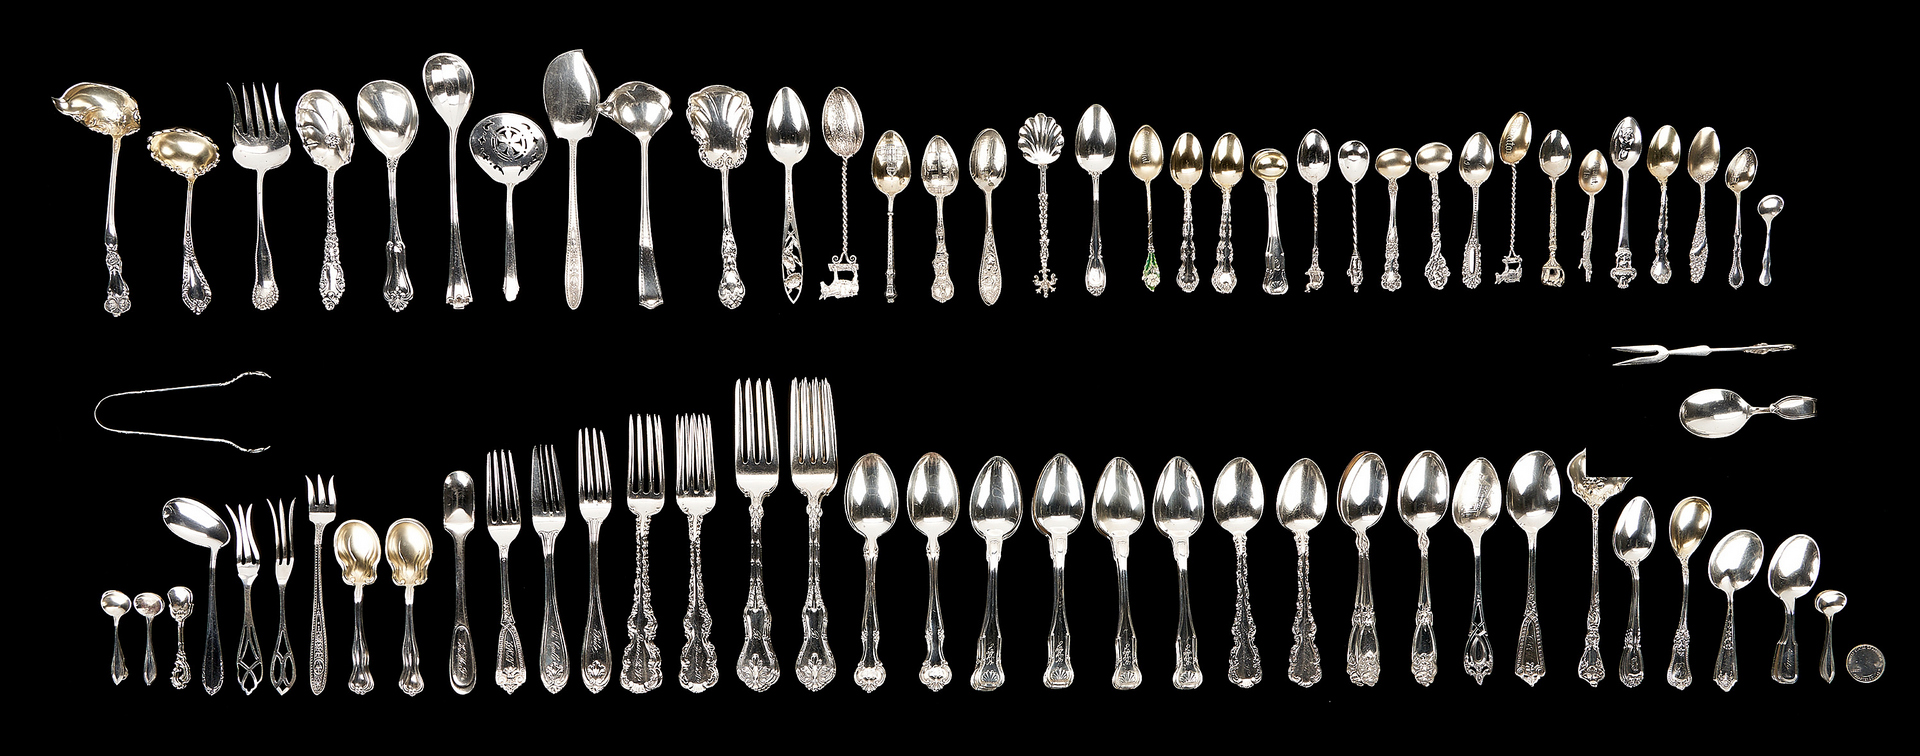 Lot 427: 108 Pcs. Assorted Flatware, Sterling & Coin